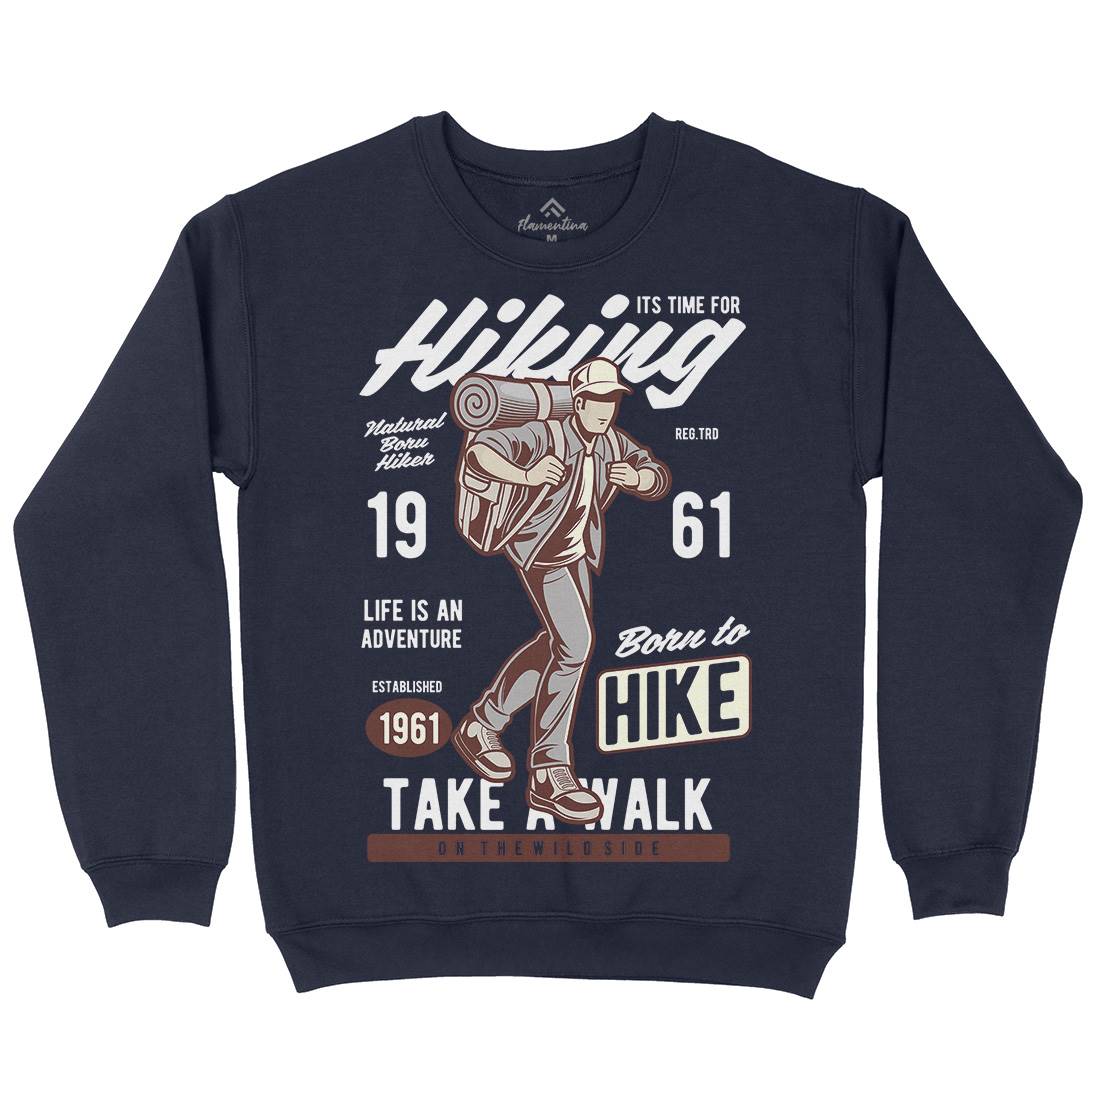 Its Time For Hiking Kids Crew Neck Sweatshirt Nature C382